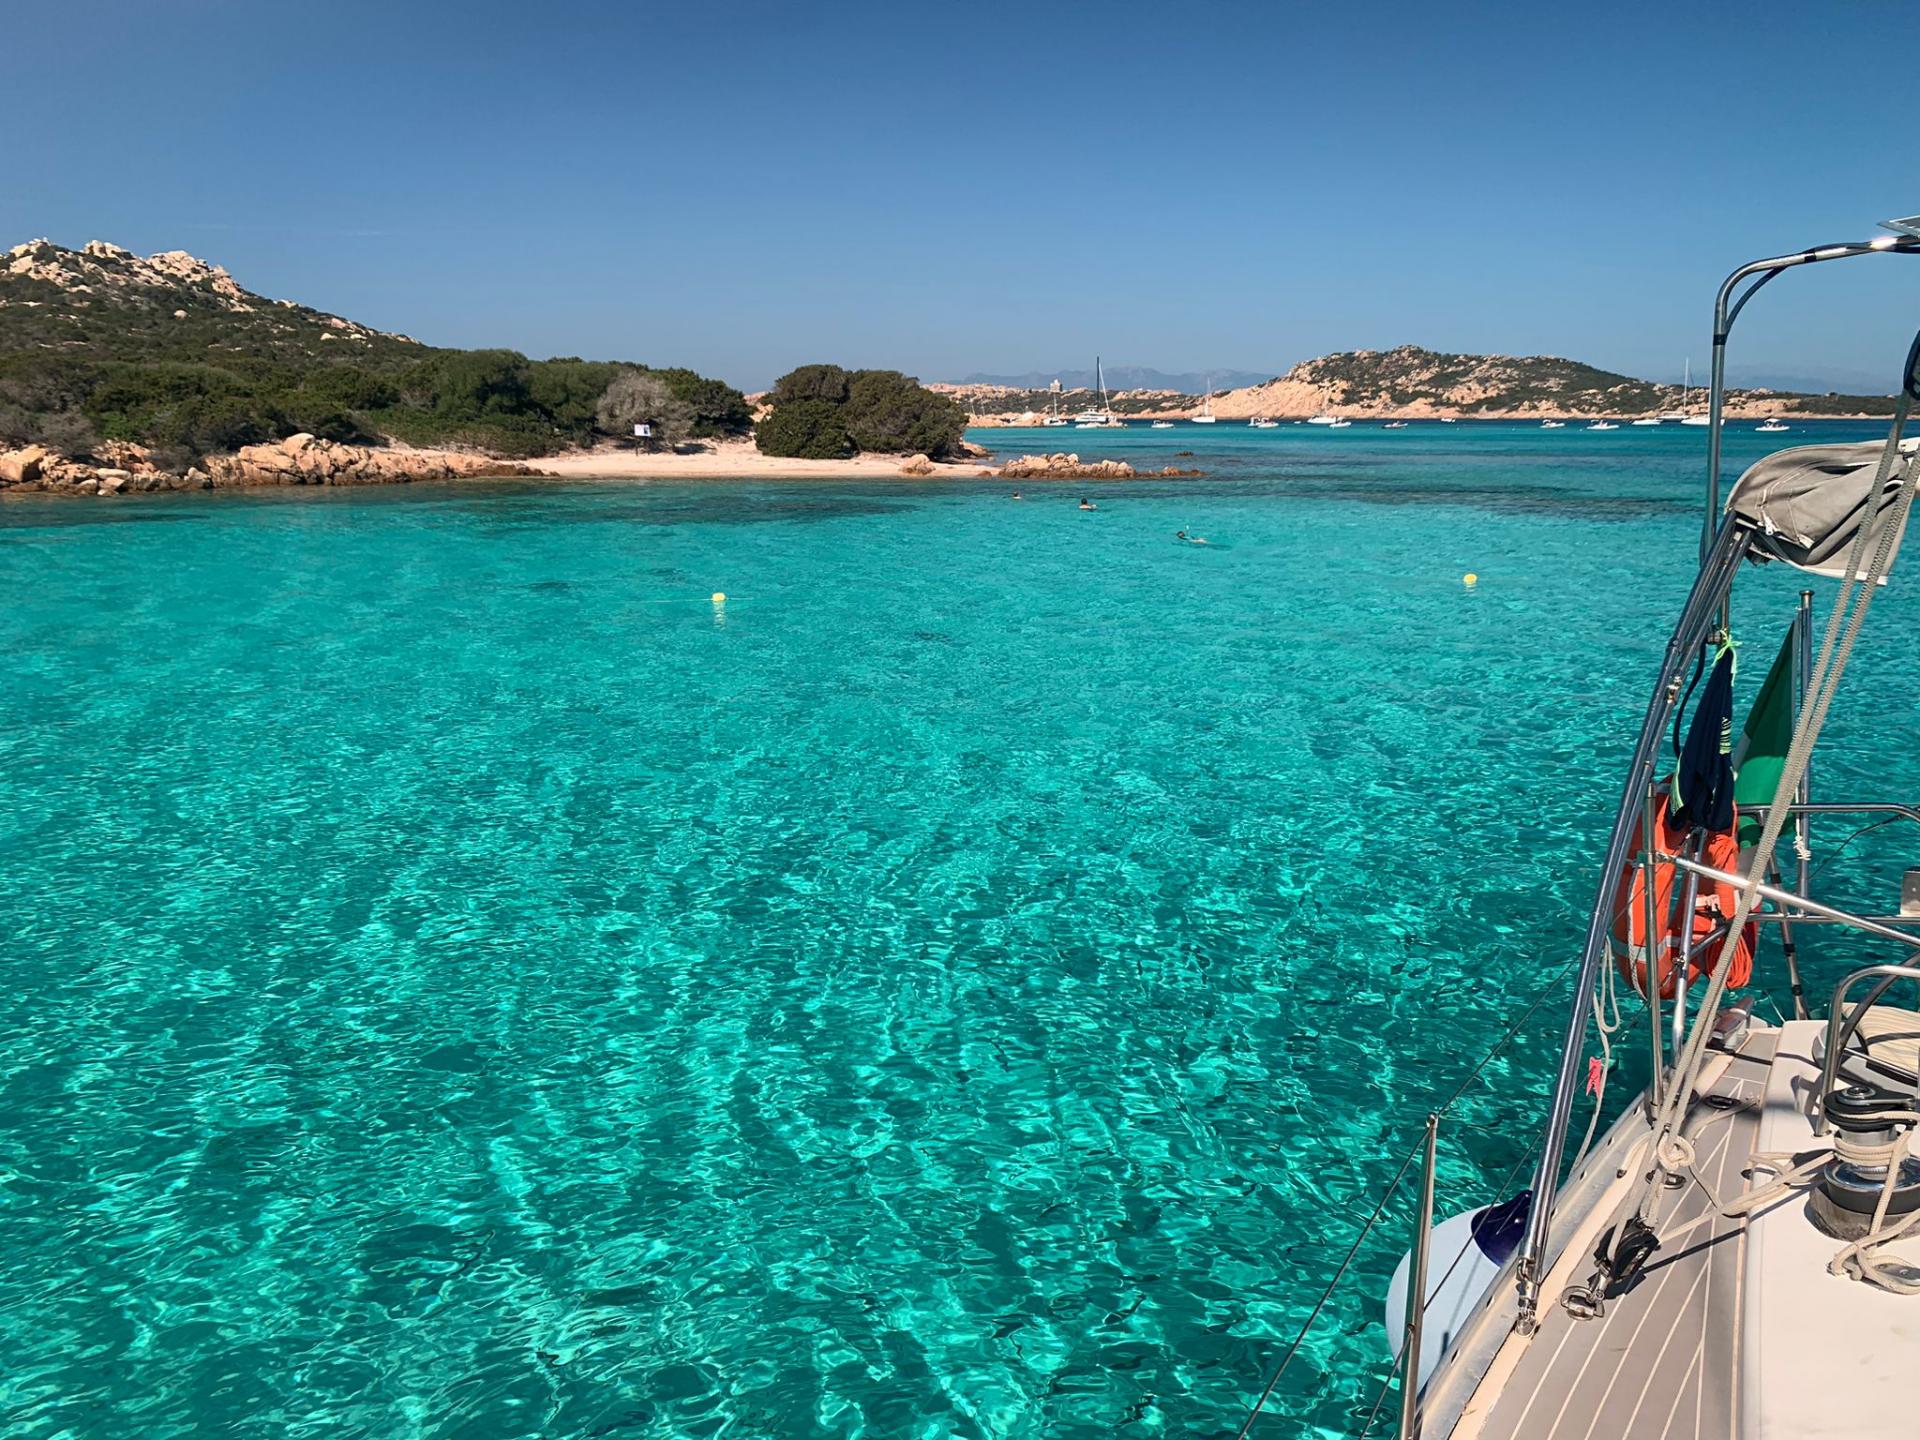 Sailing boat in the crystal clear sea in the Corsica Archipelago between Lavezzi and Piana Island